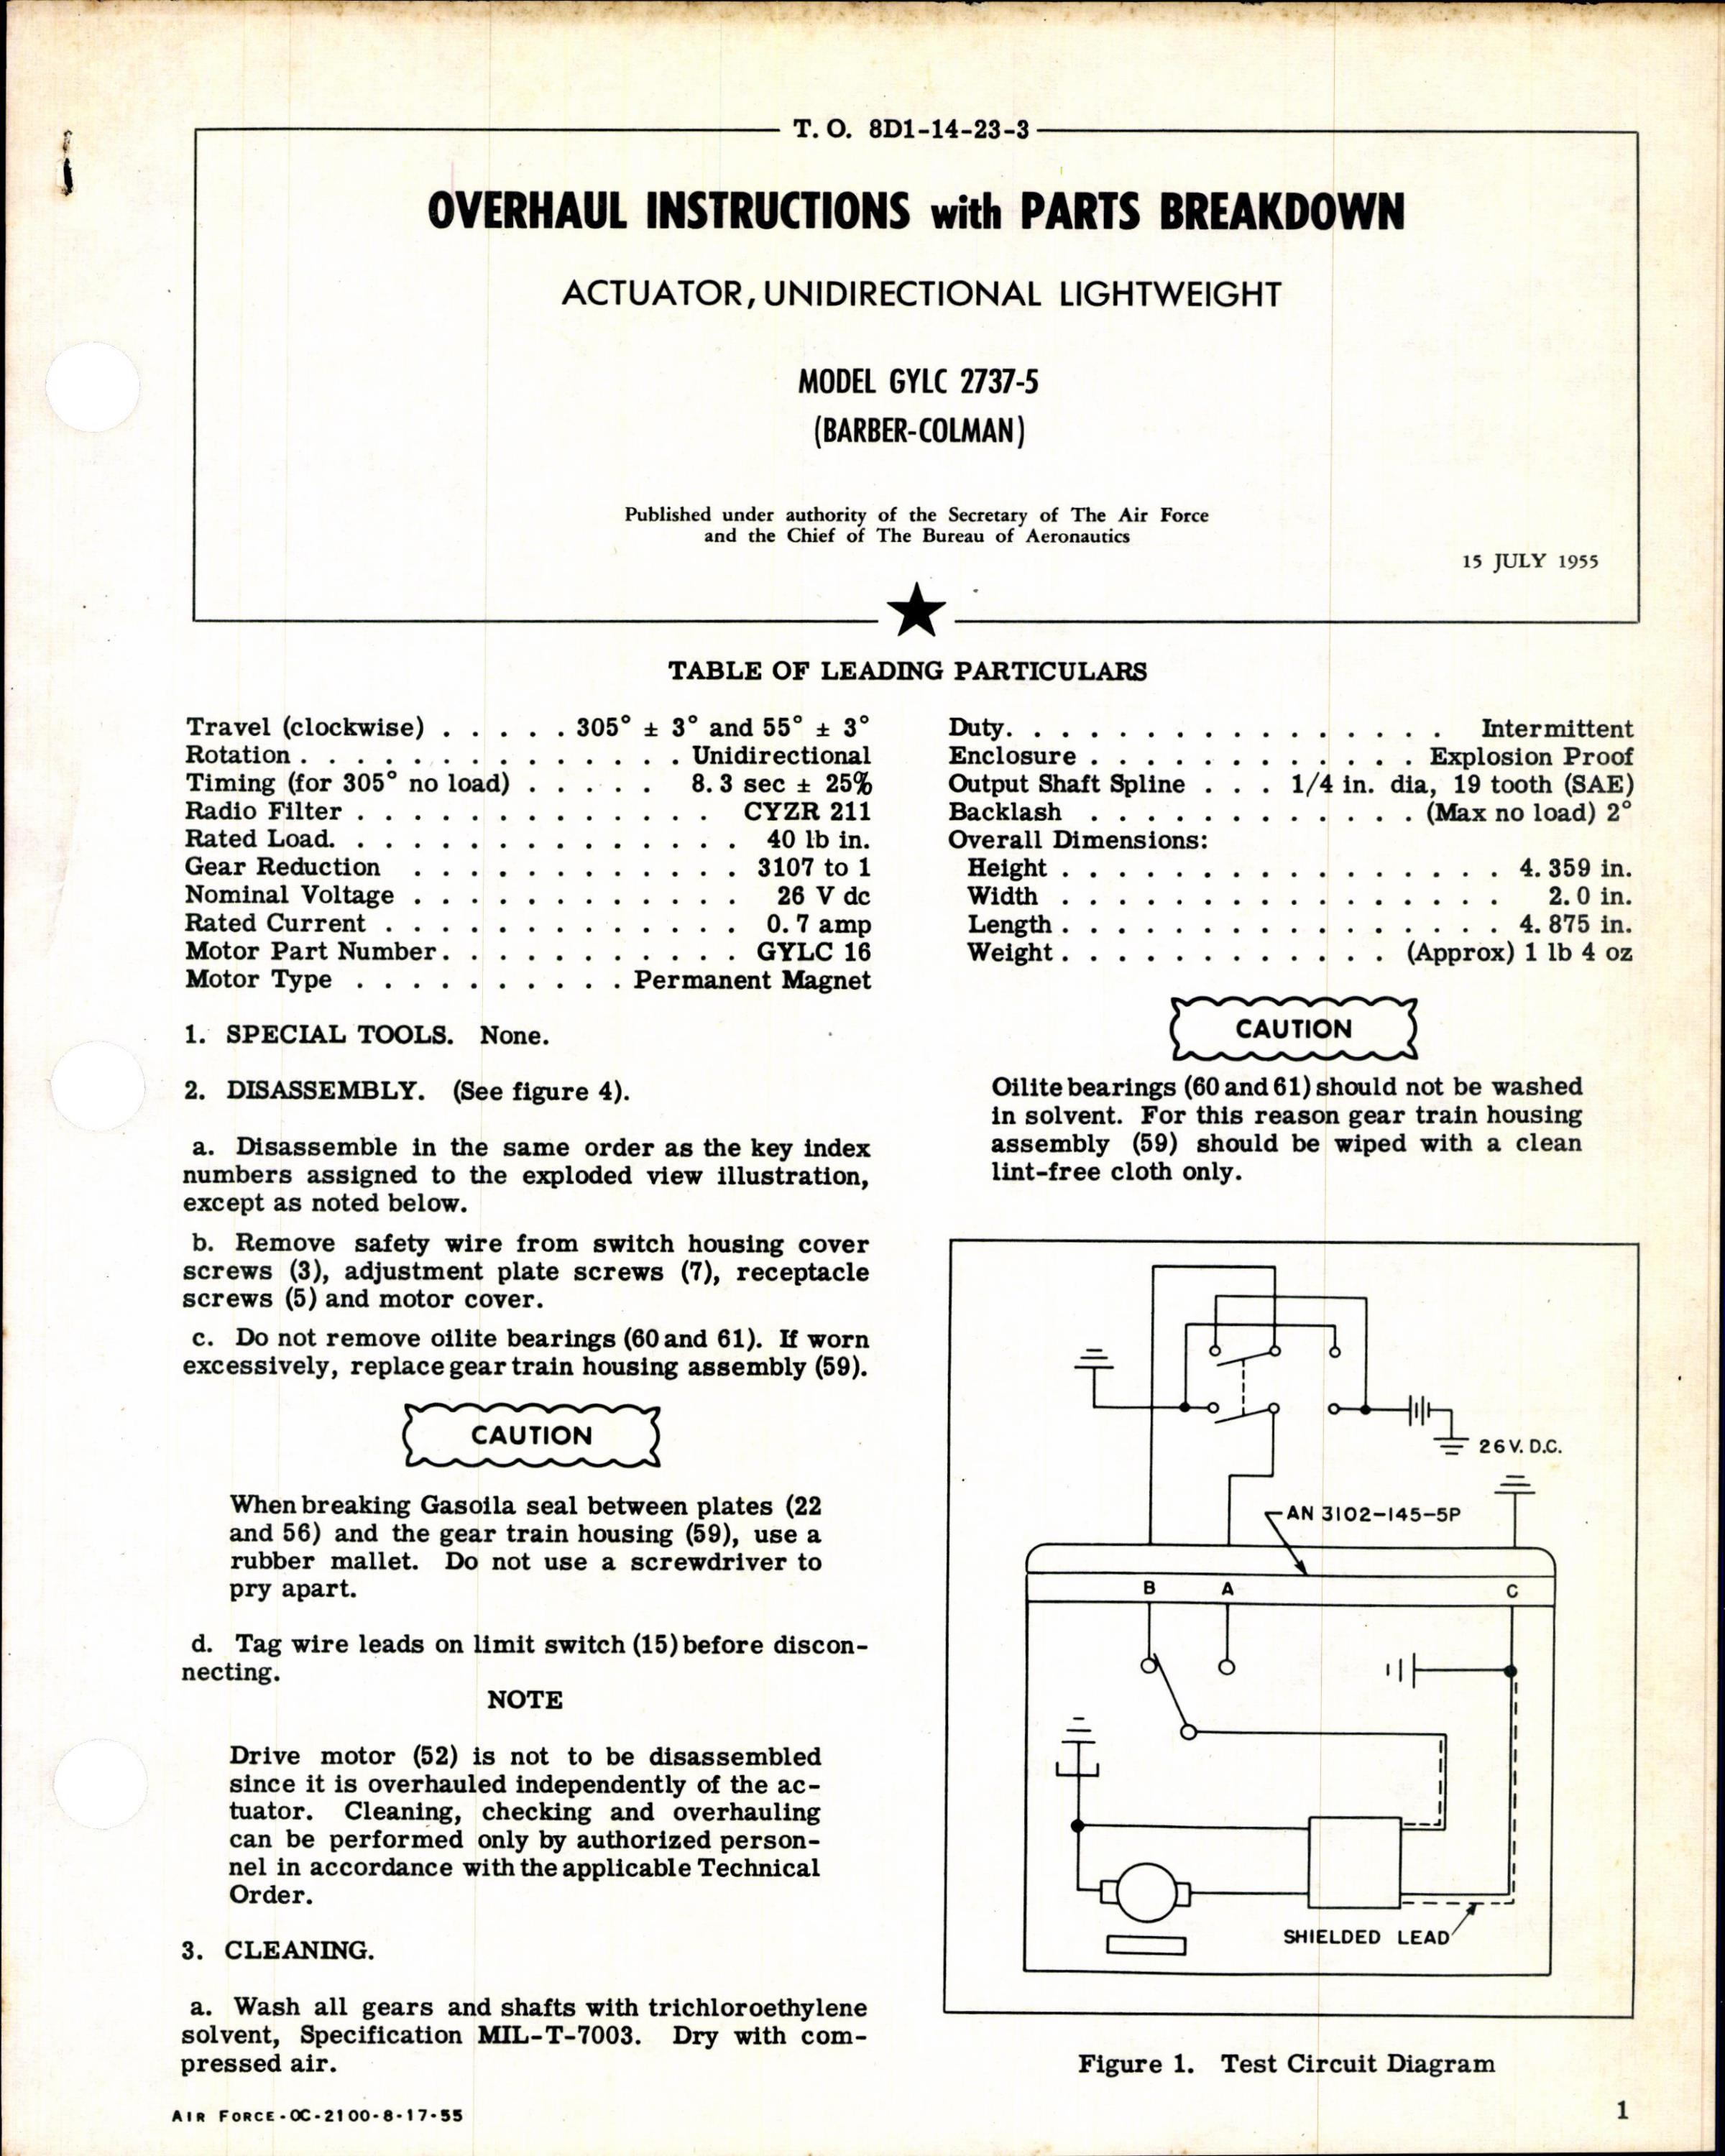 Sample page 1 from AirCorps Library document: Instructions w Parts Breakdown for Actuator, Undirectional